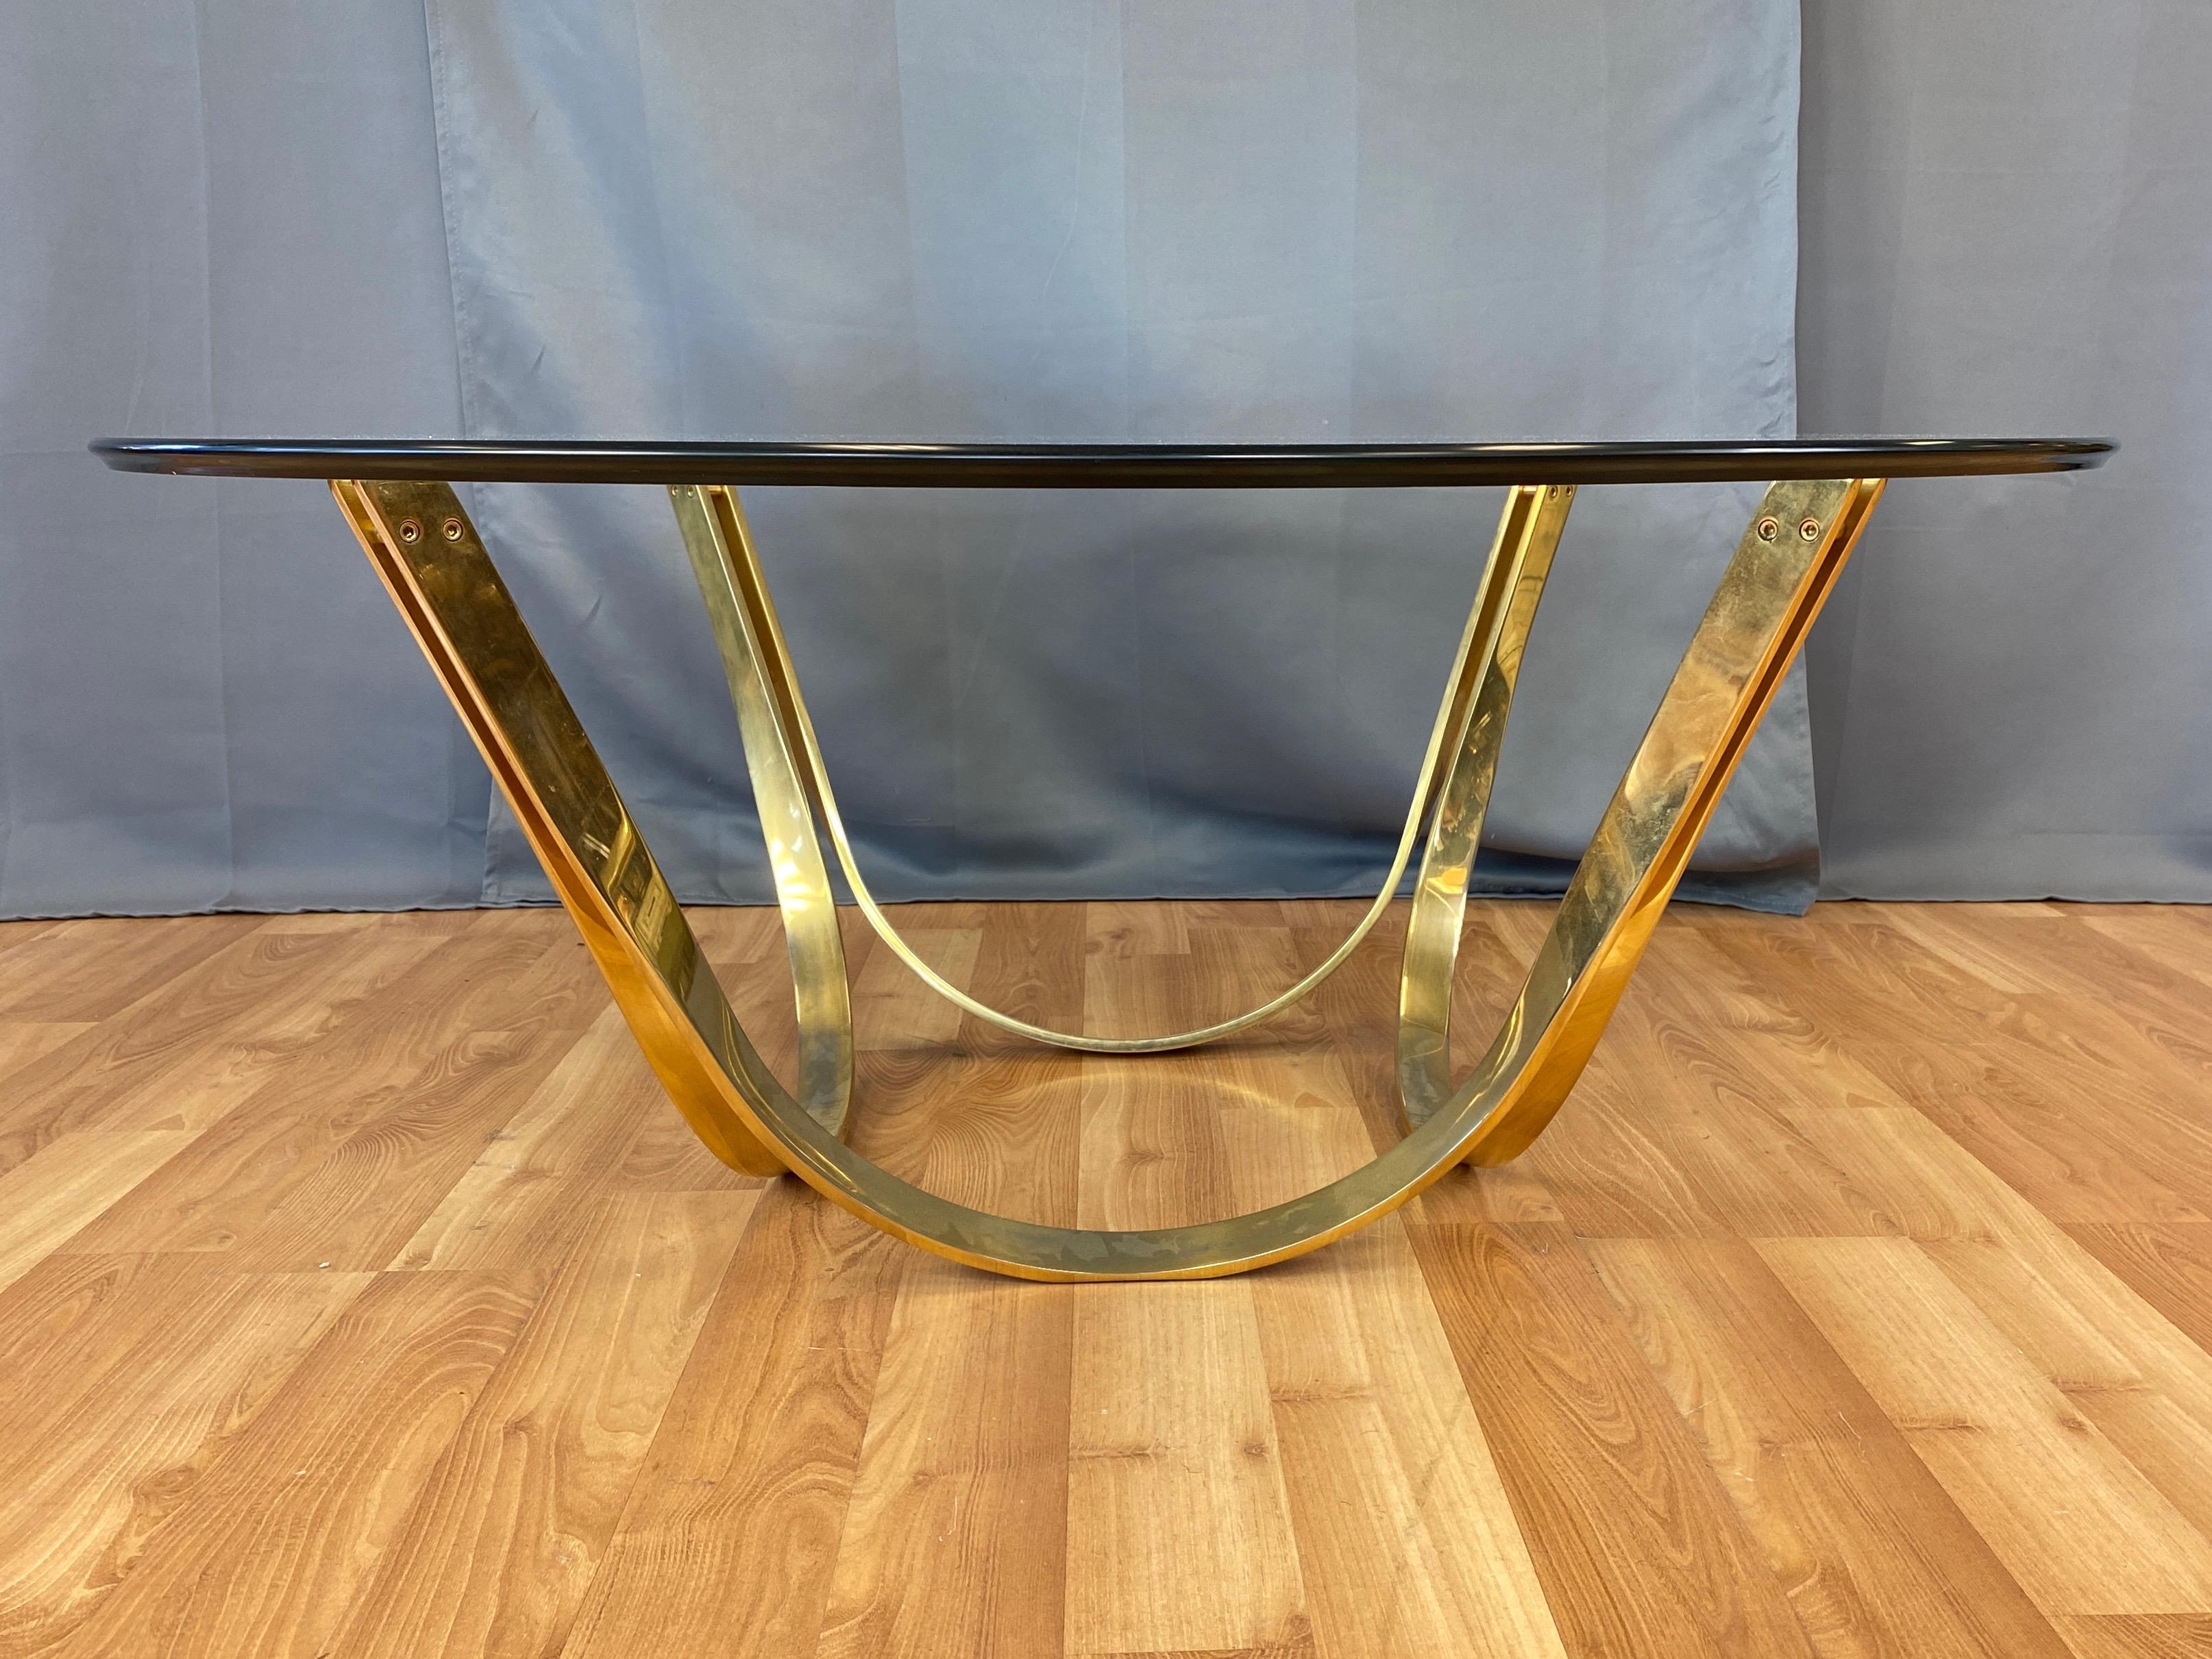 Mid-Century Modern TriMark Brass-Plated Steel & Glass Coffee Table after Sprunger for Dunbar, 1970s